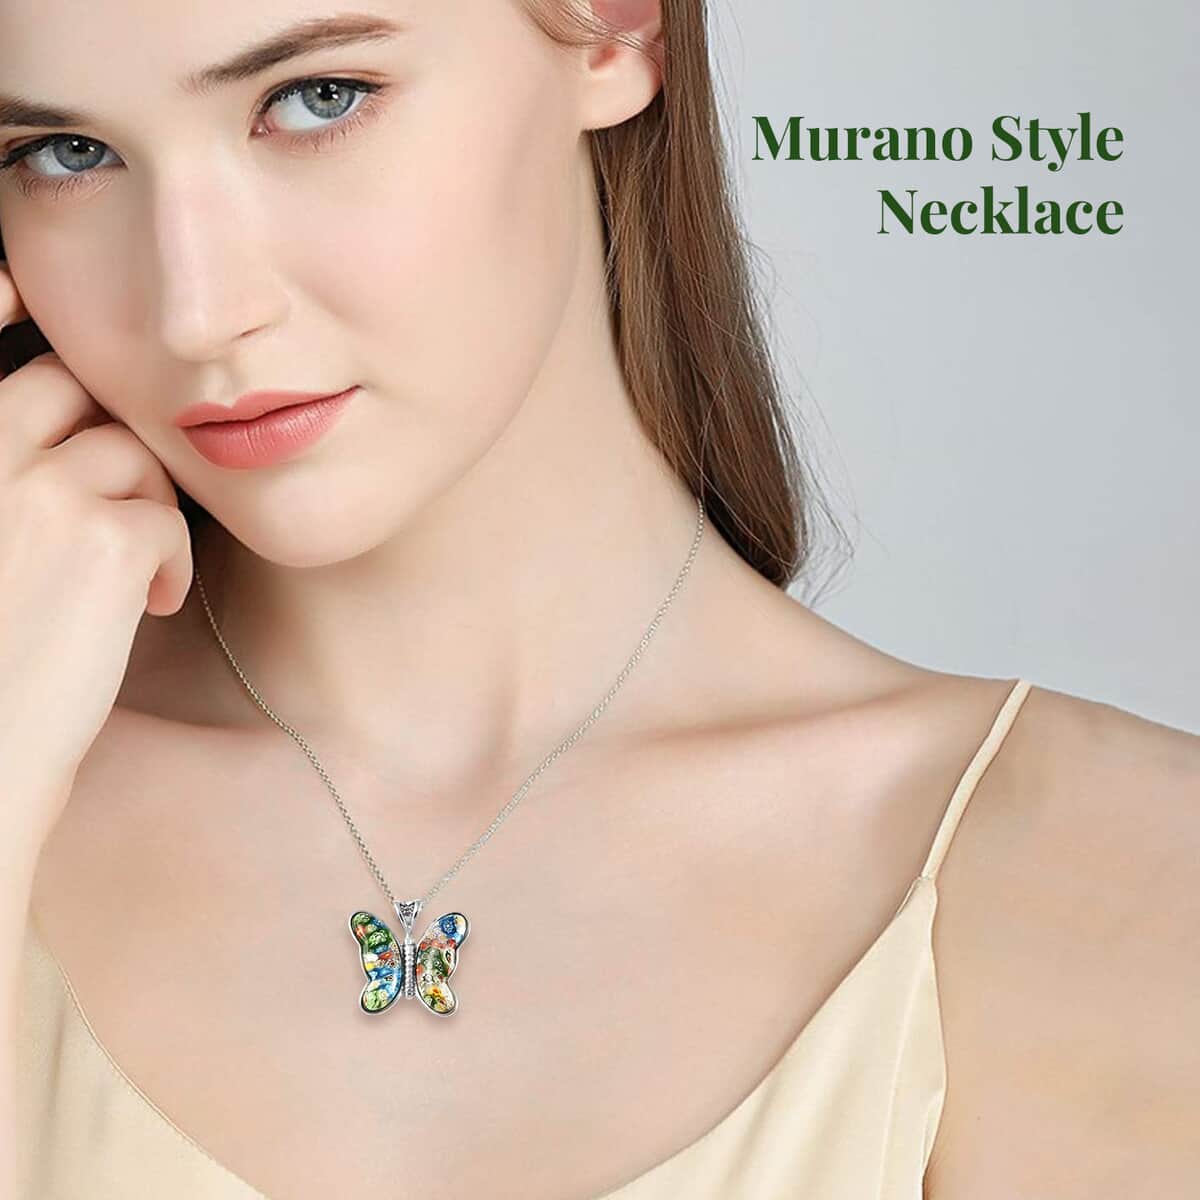 Murano Style Necklace in Stainless Steel, Butterfly Pendant, Wedding Gifts For Women (24 Inches) image number 2